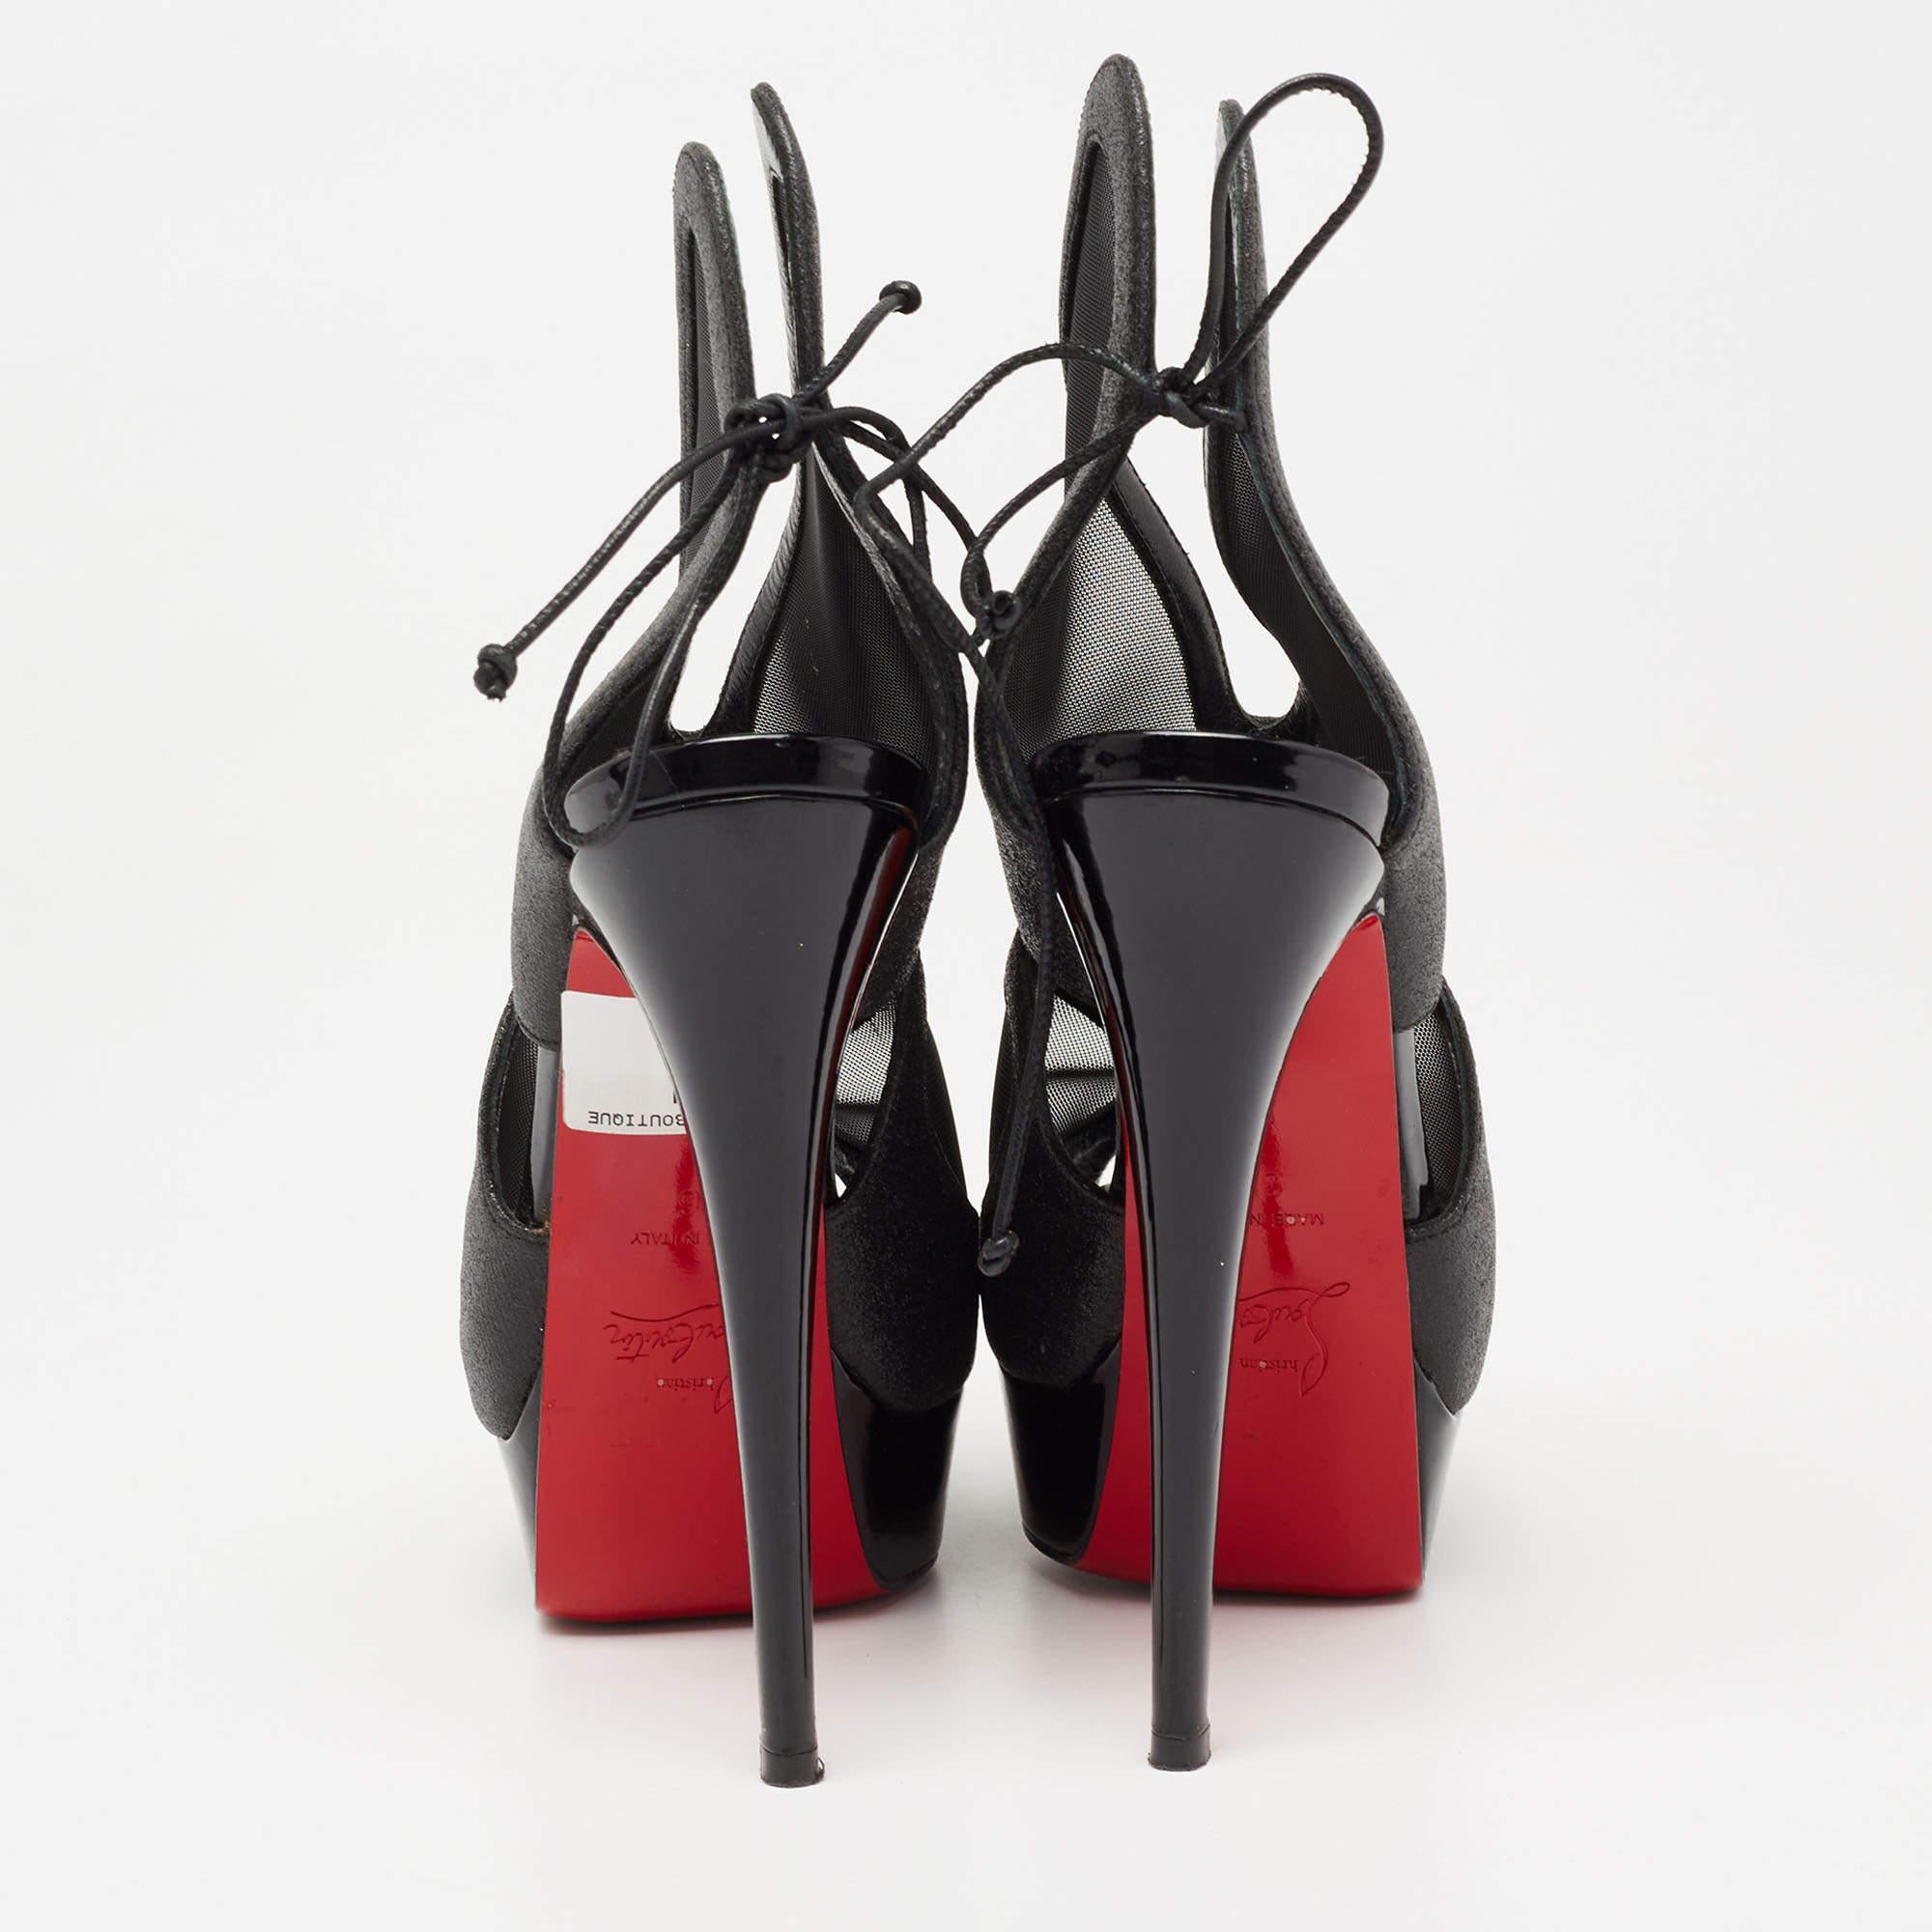 With these gorgeous booties from the House of Christian Louboutin, elegance, poise, and luxury come easy! They are designed using black glitter and mesh into an ankle-length profile. They display platforms, peep toes, and tall heels. Look fabulous